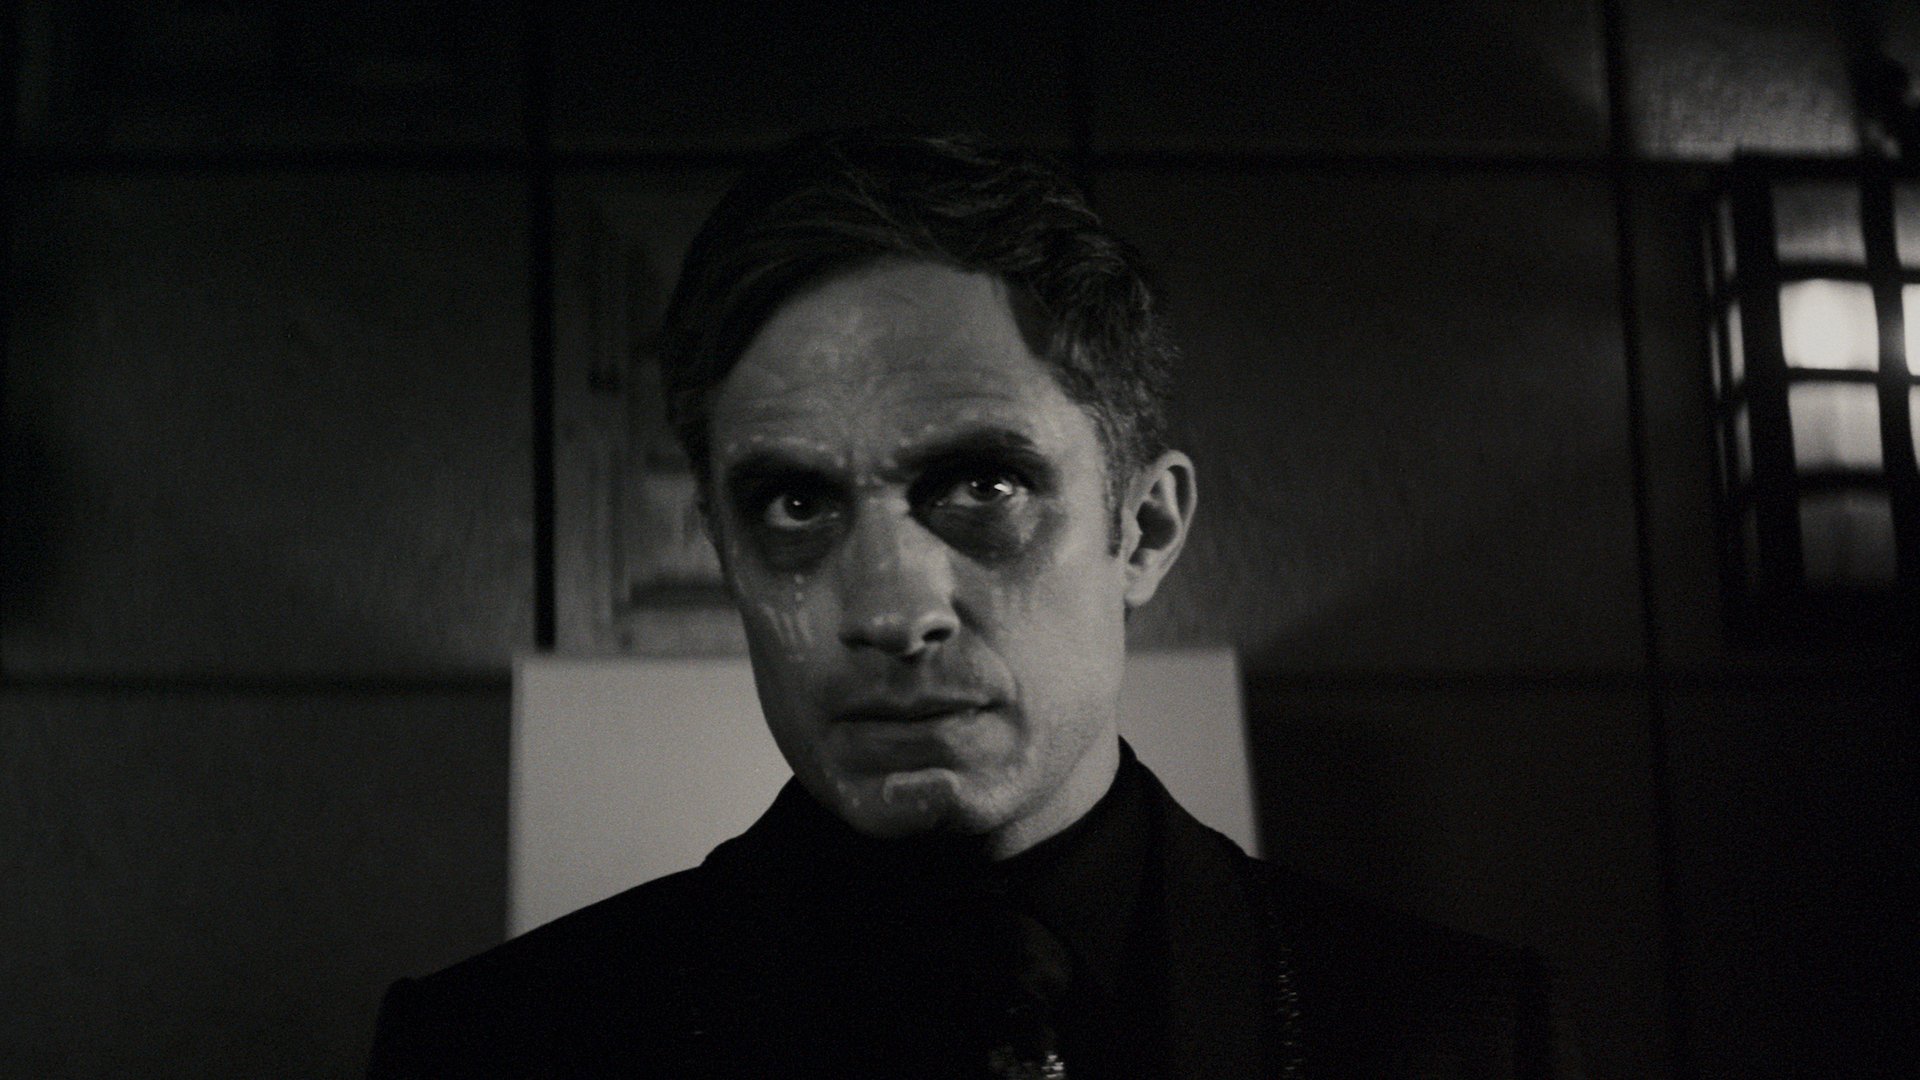 A black and white film still showing a man with face paint markings.